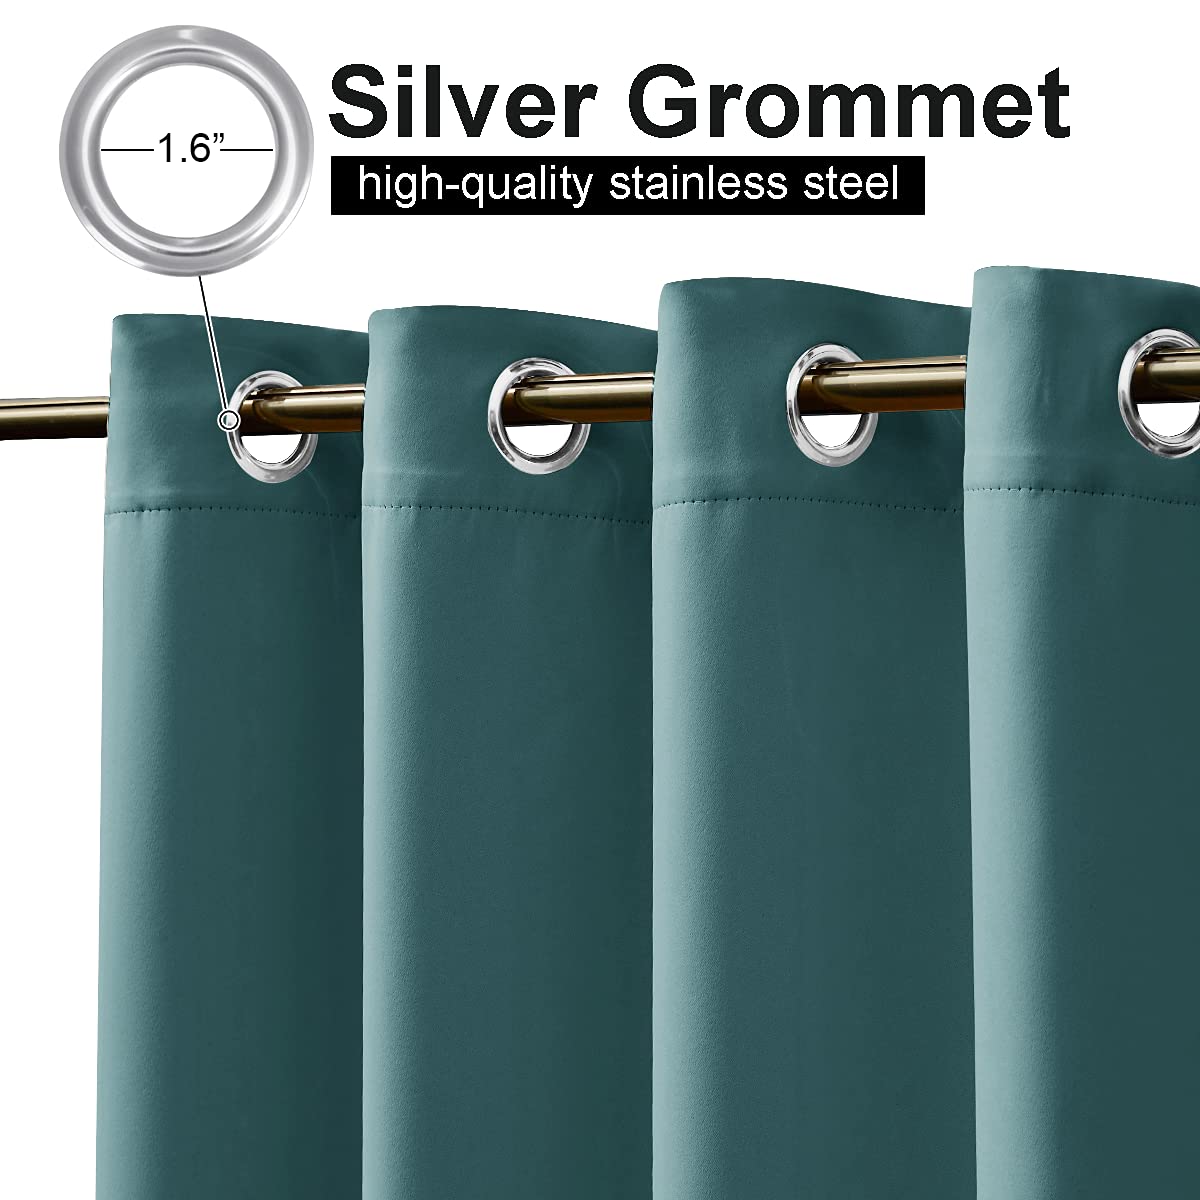 Outdoor Grommet Curtain for Patio Porch Waterproof Thermal Insulated 1 Panel KGORGE Store